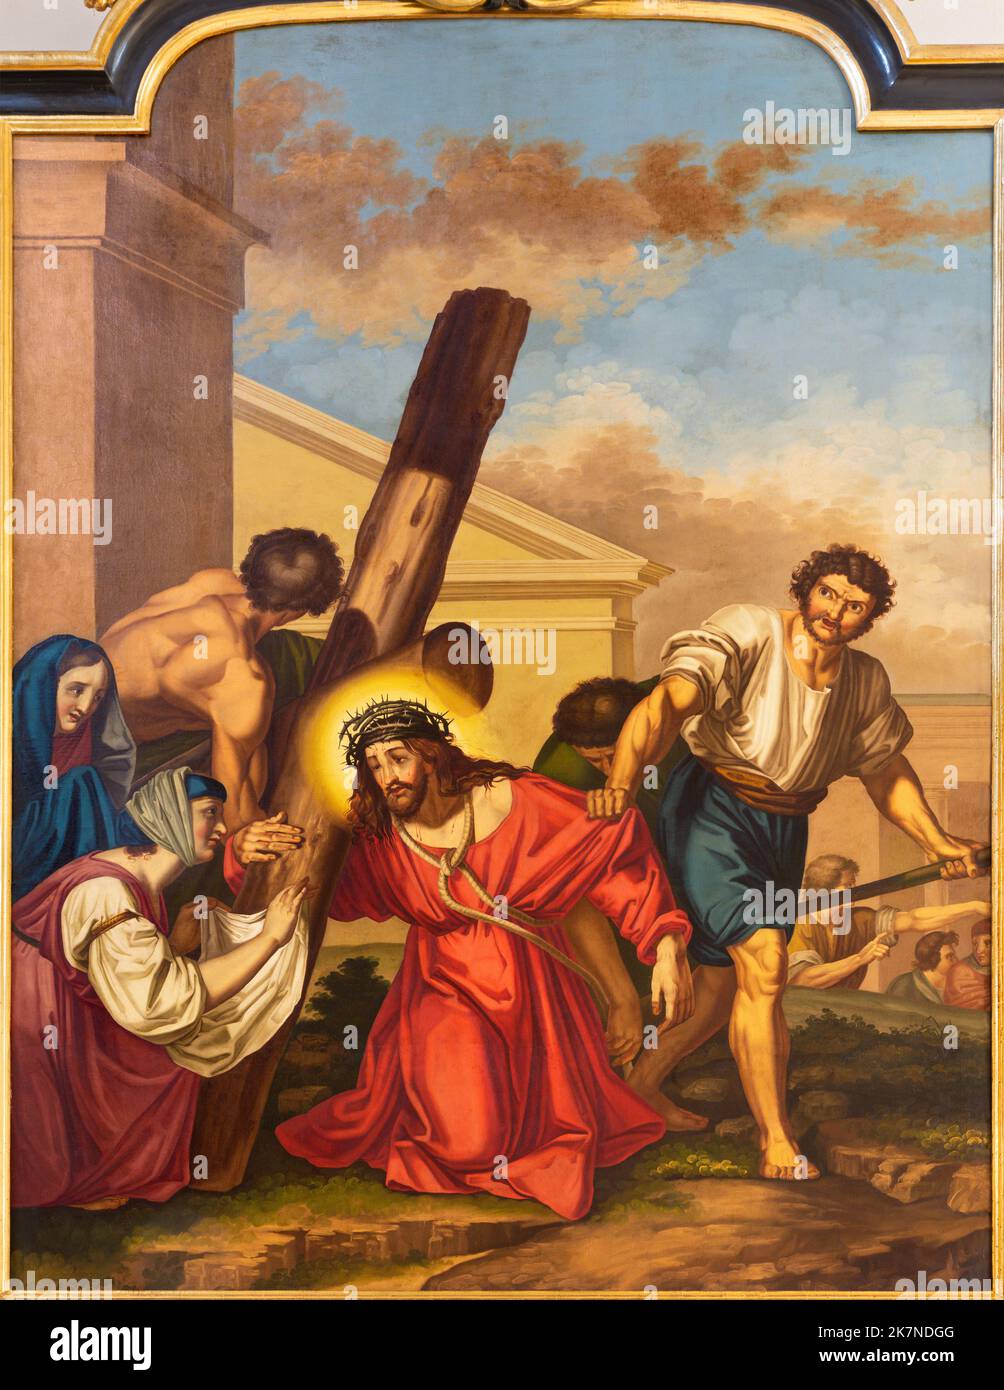 AOSTA, ITALY - JULY 14, 2018: The painting Veronica wipes the face of Jesus (part ot Via Crucis) in the church Cattedrale di Santa Maria Assunta Stock Photo